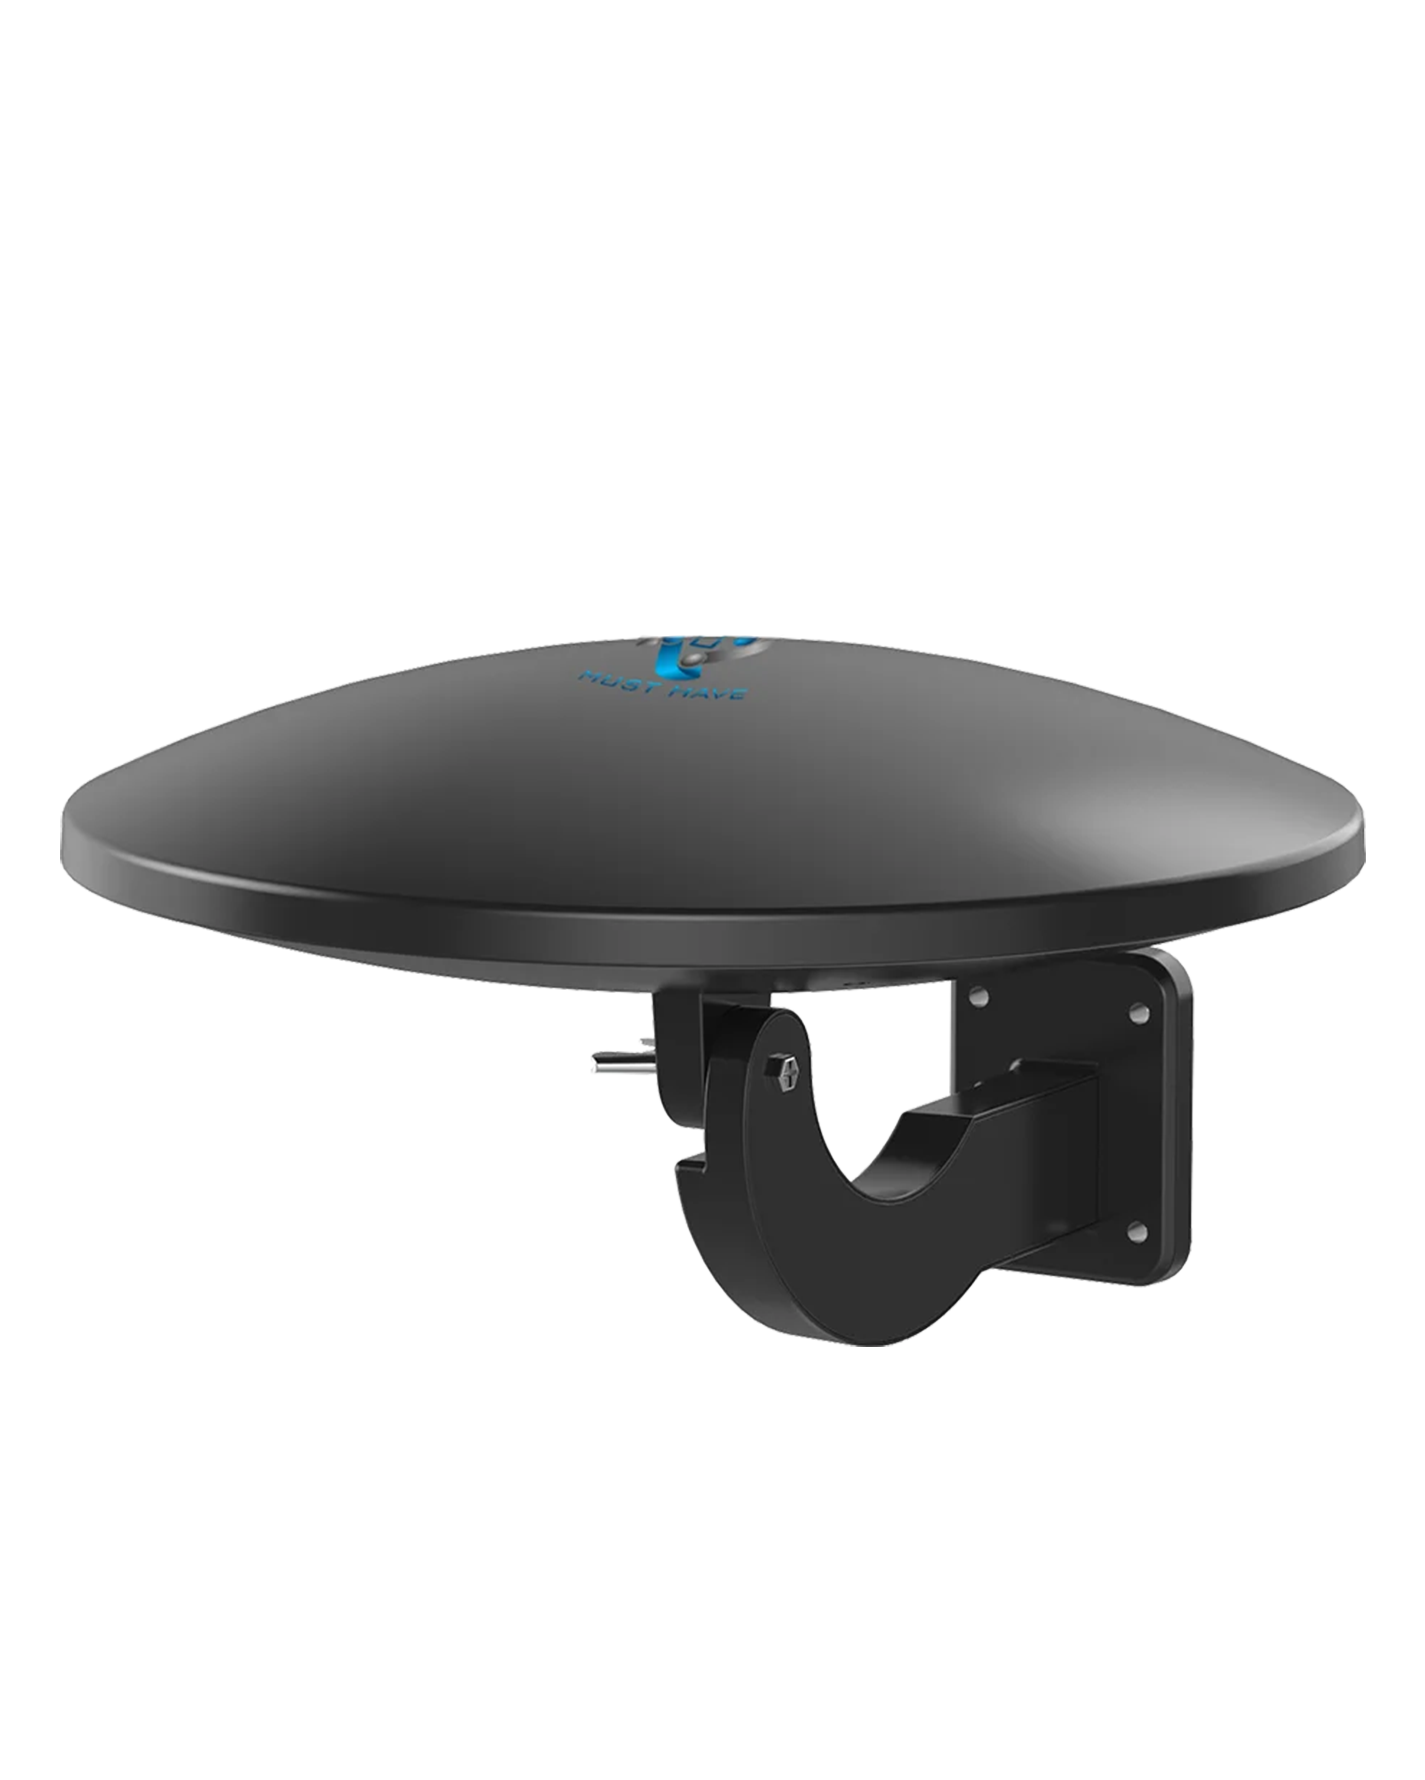 Omni-Directional Amplified Outdoor TV Antenna - 360°